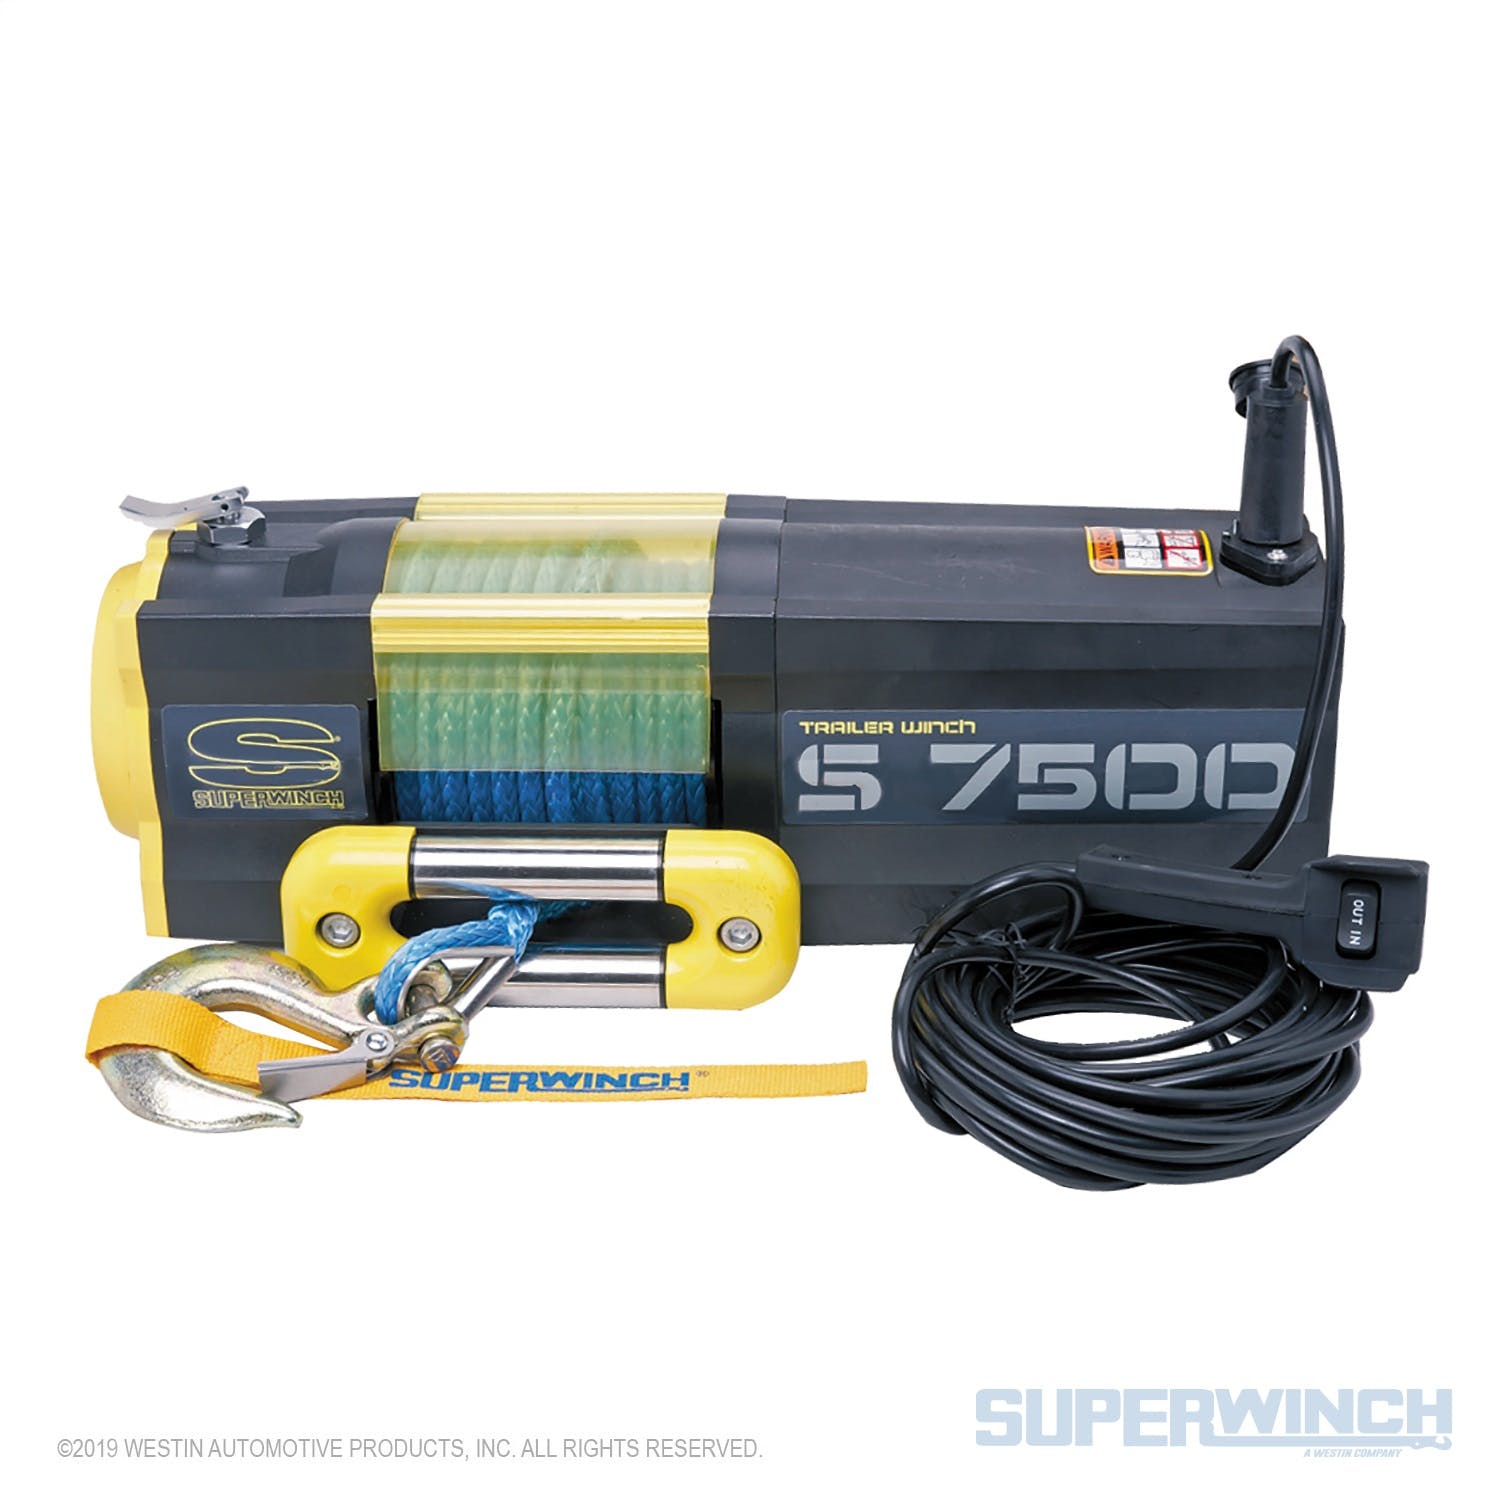 Superwinch 1475201 S7500 Winch Synthetic